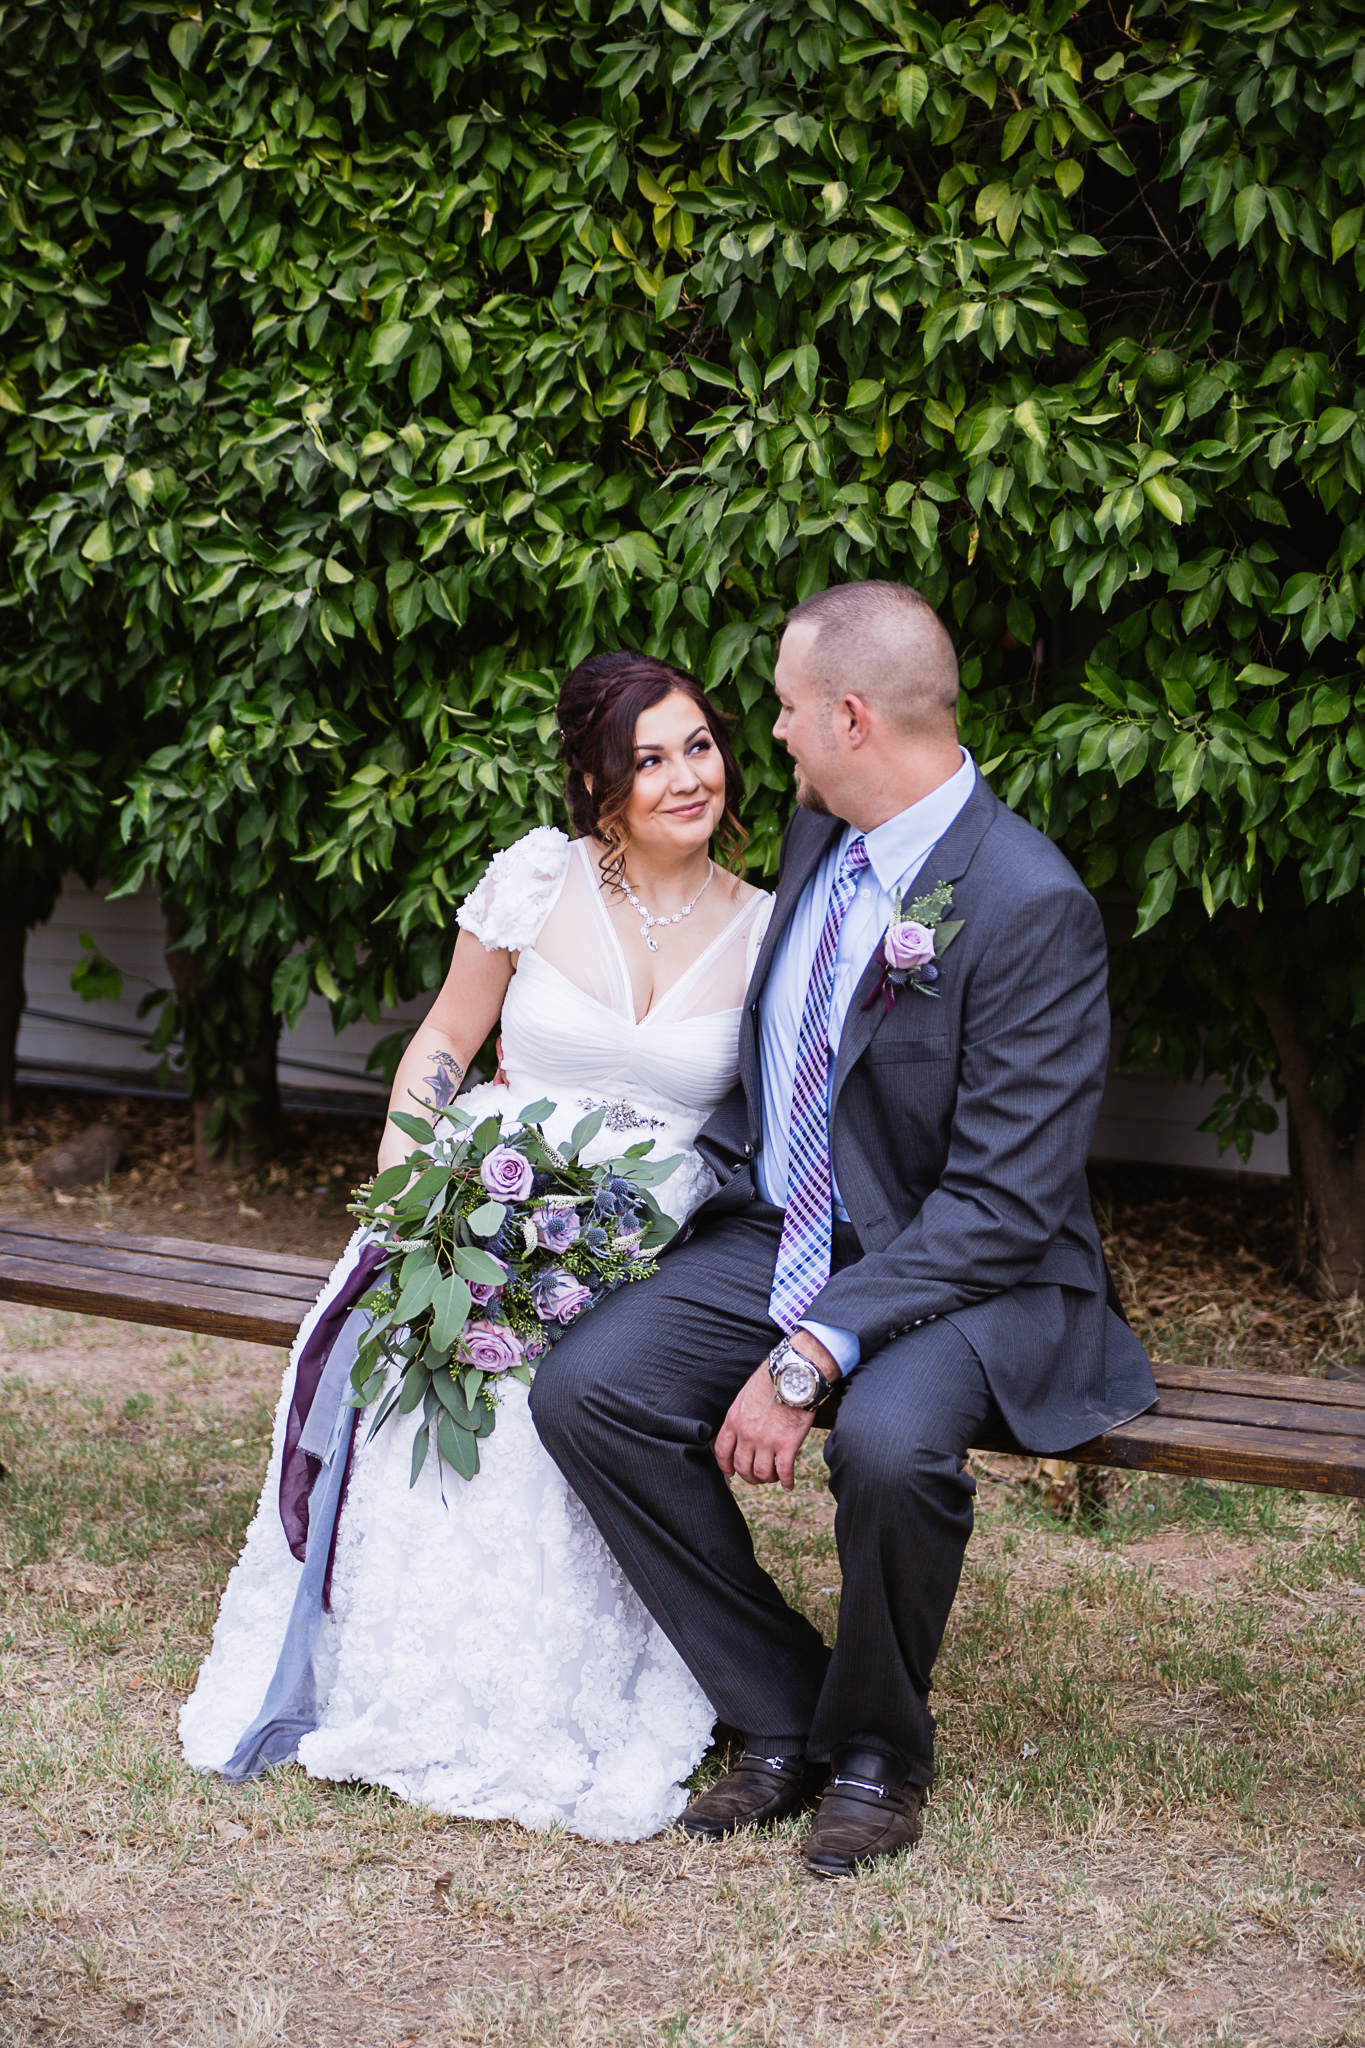 Bride and groom look lovingly at each other on a bench by Arizona wedding photographer PMA Photography.